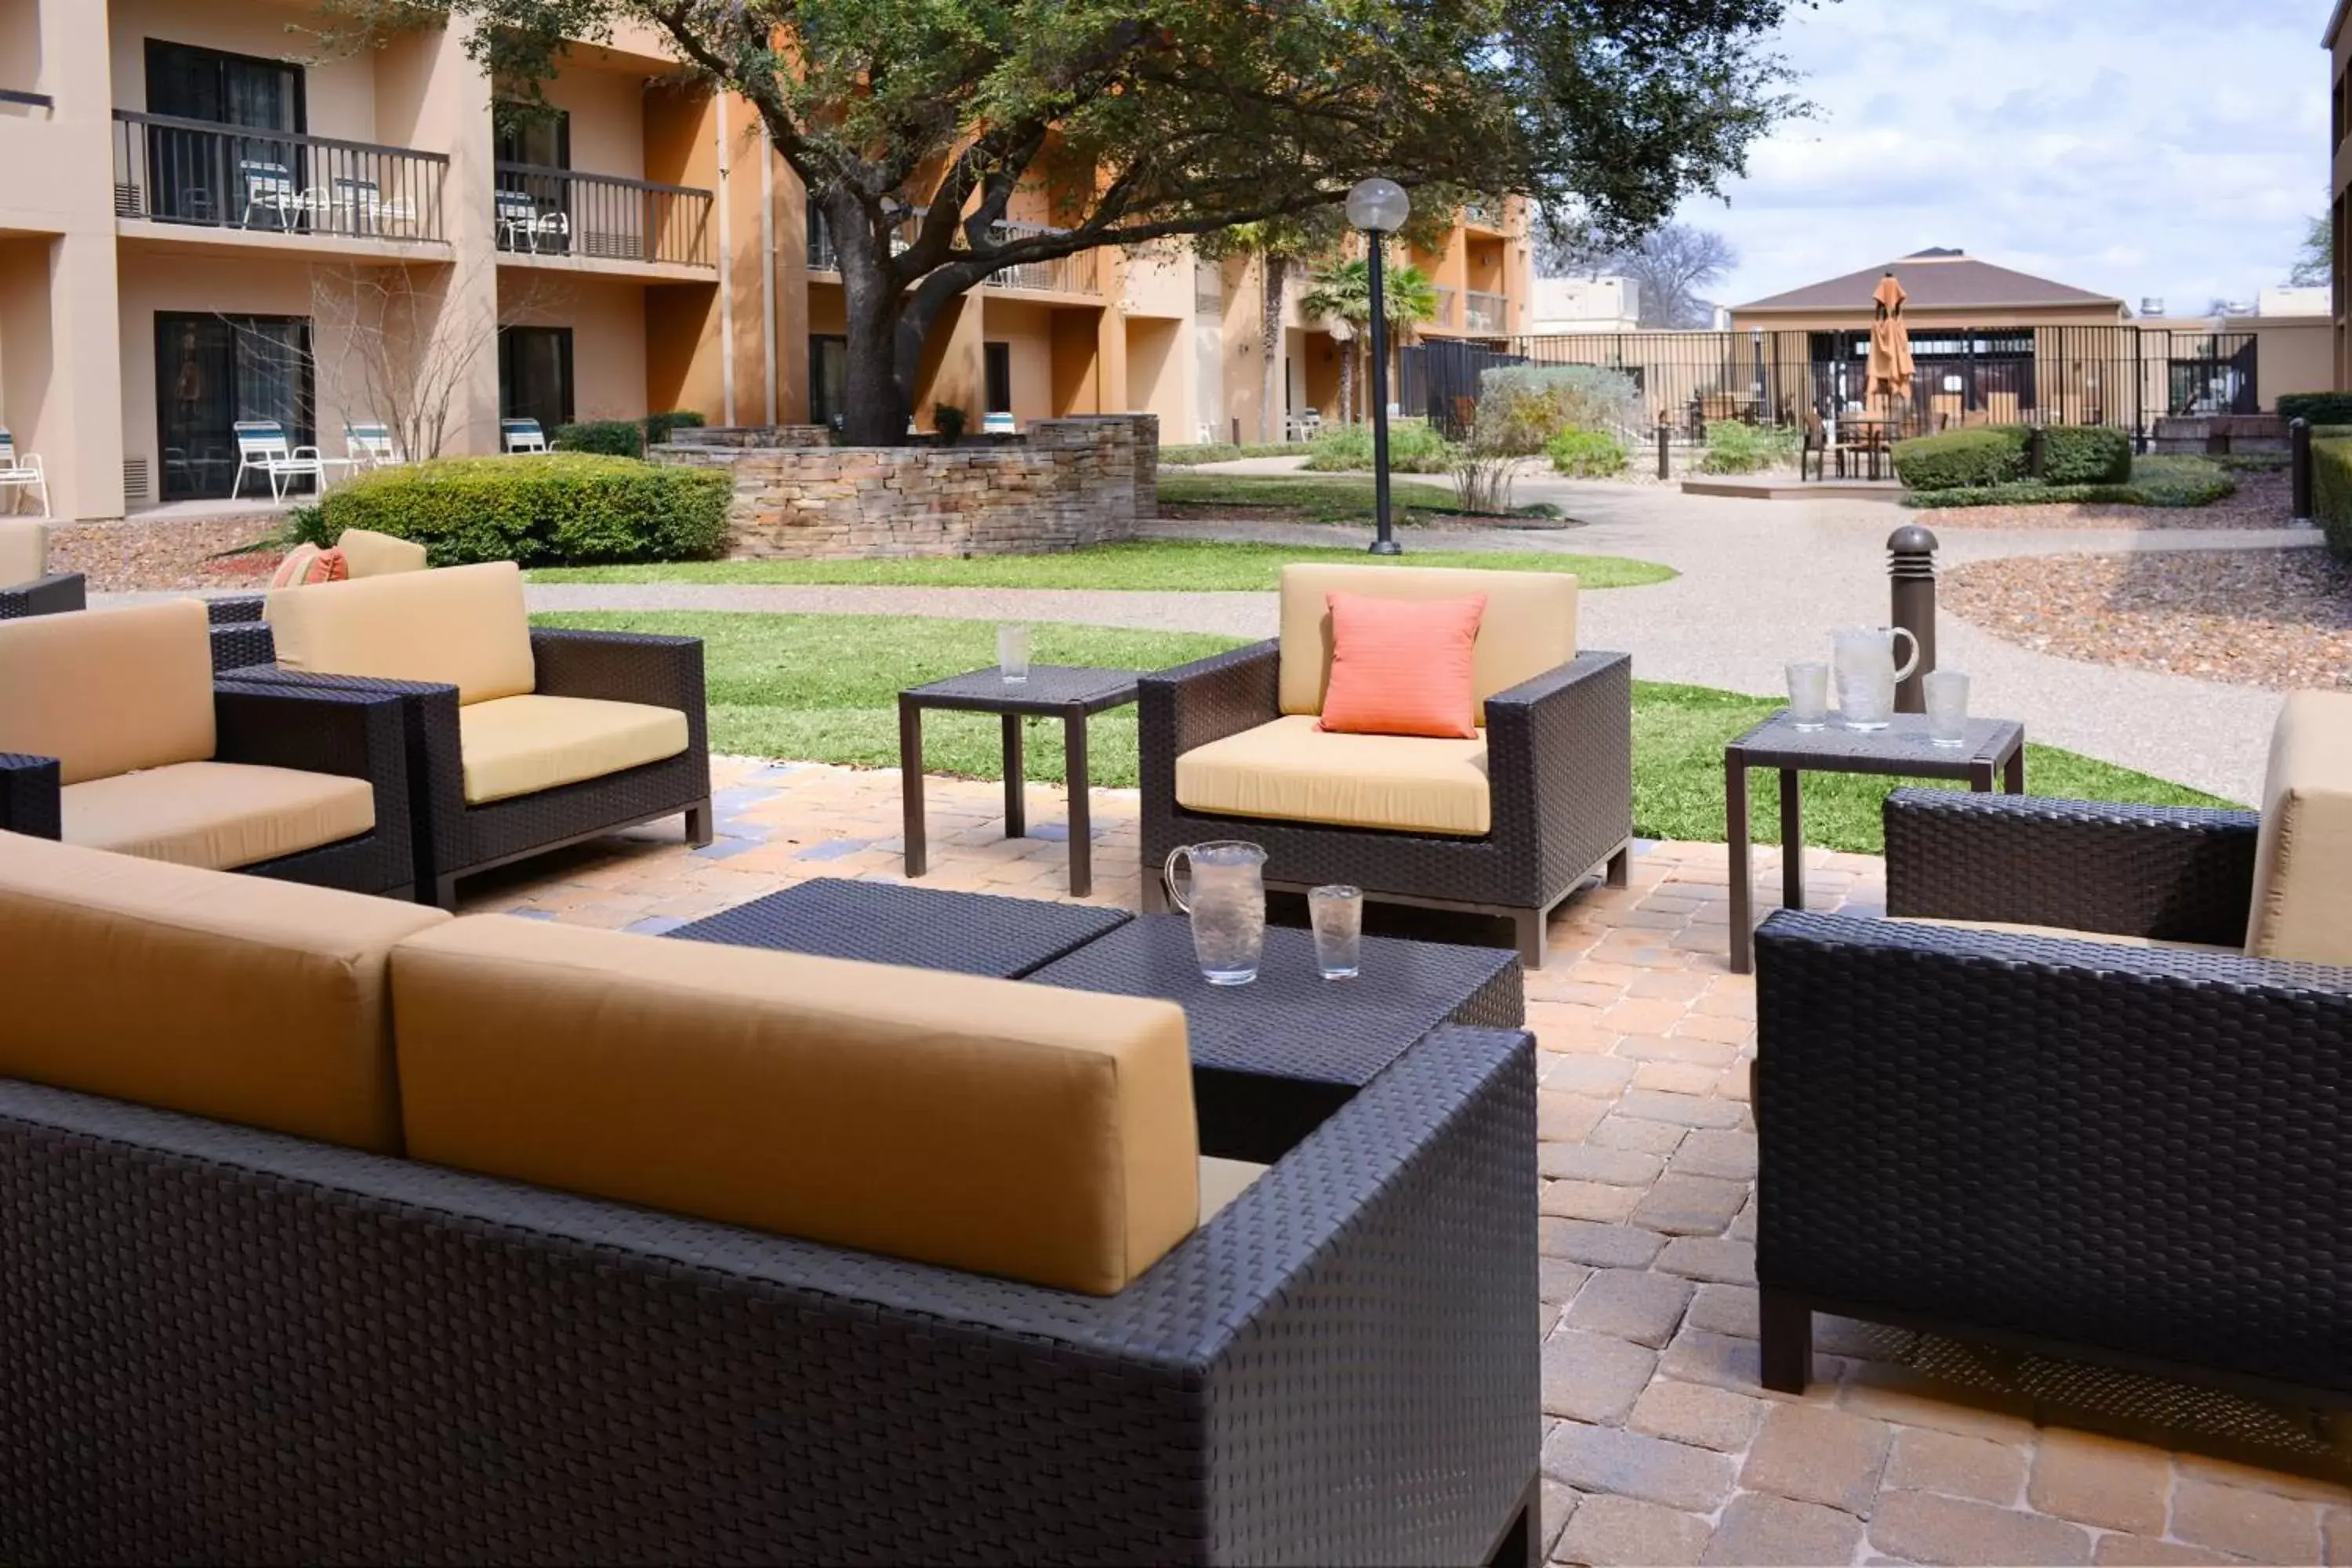 Property building in Courtyard by Marriott San Antonio Medical Center